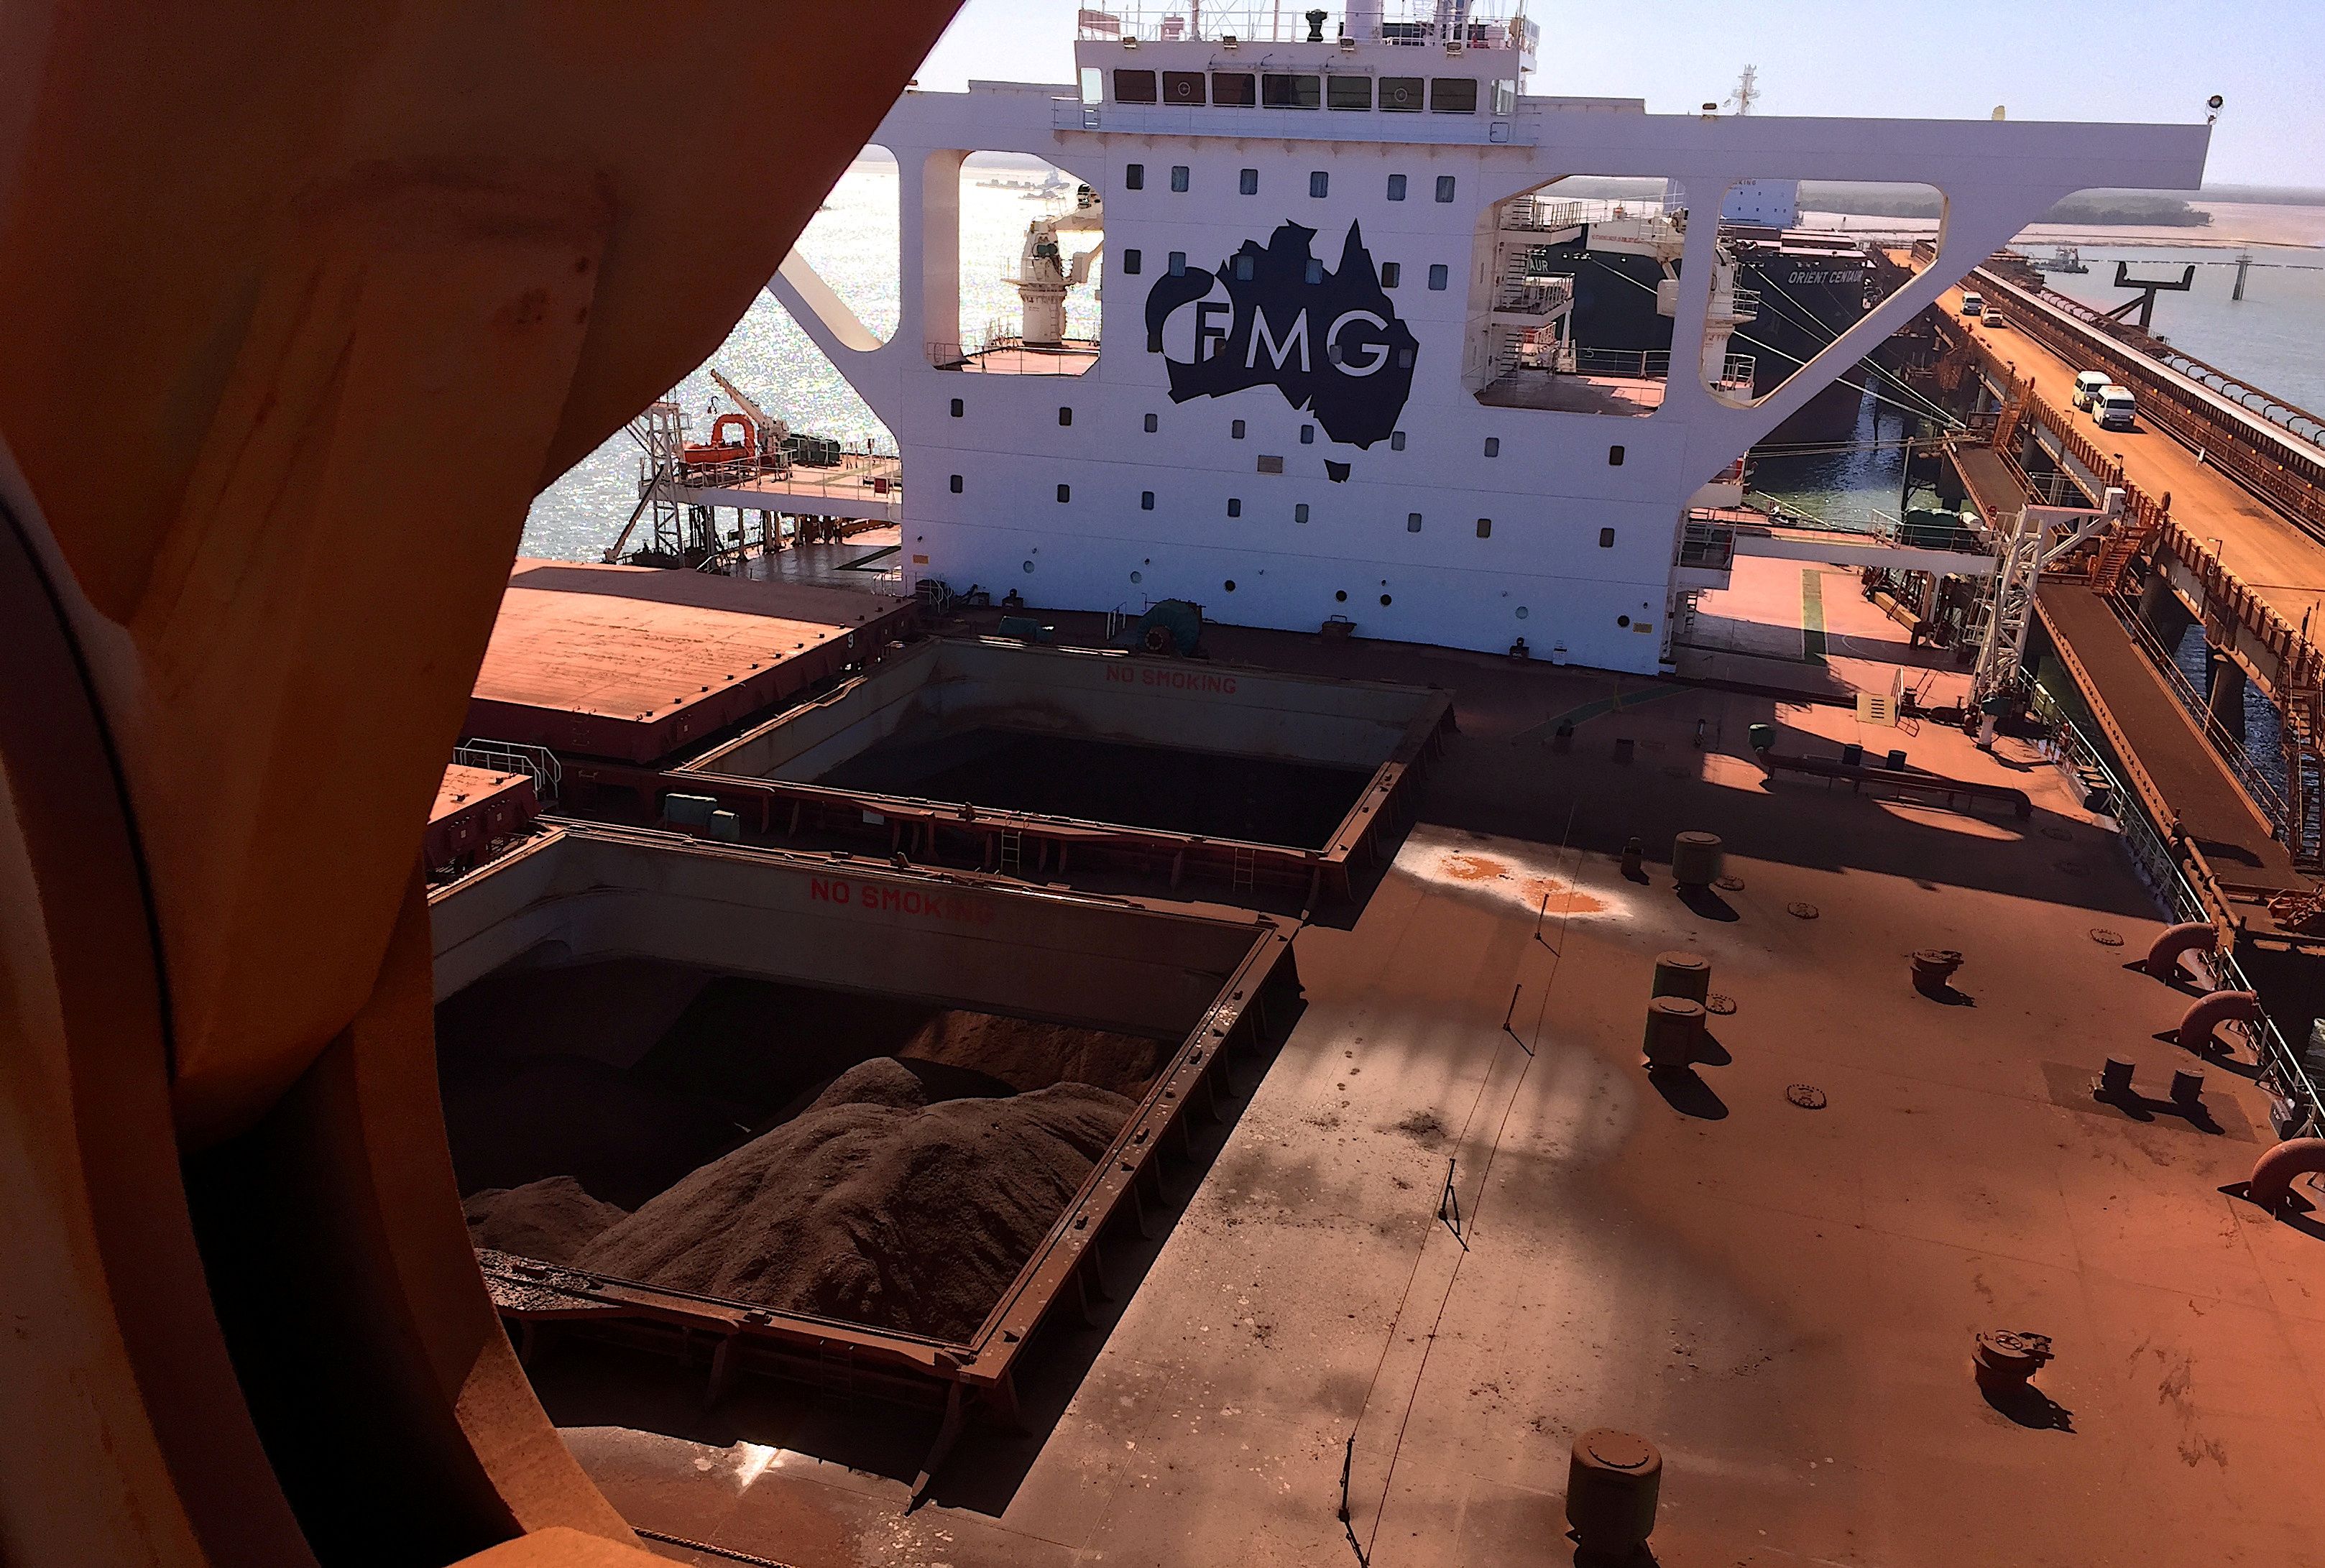 The logo of Australia's Fortescue Metals Group (FMG) can be seen on a bulk carrier as it is loaded with iron ore at the coastal town of Port Hedland in Western Australia, November 29, 2018. REUTERS/Melanie Burton